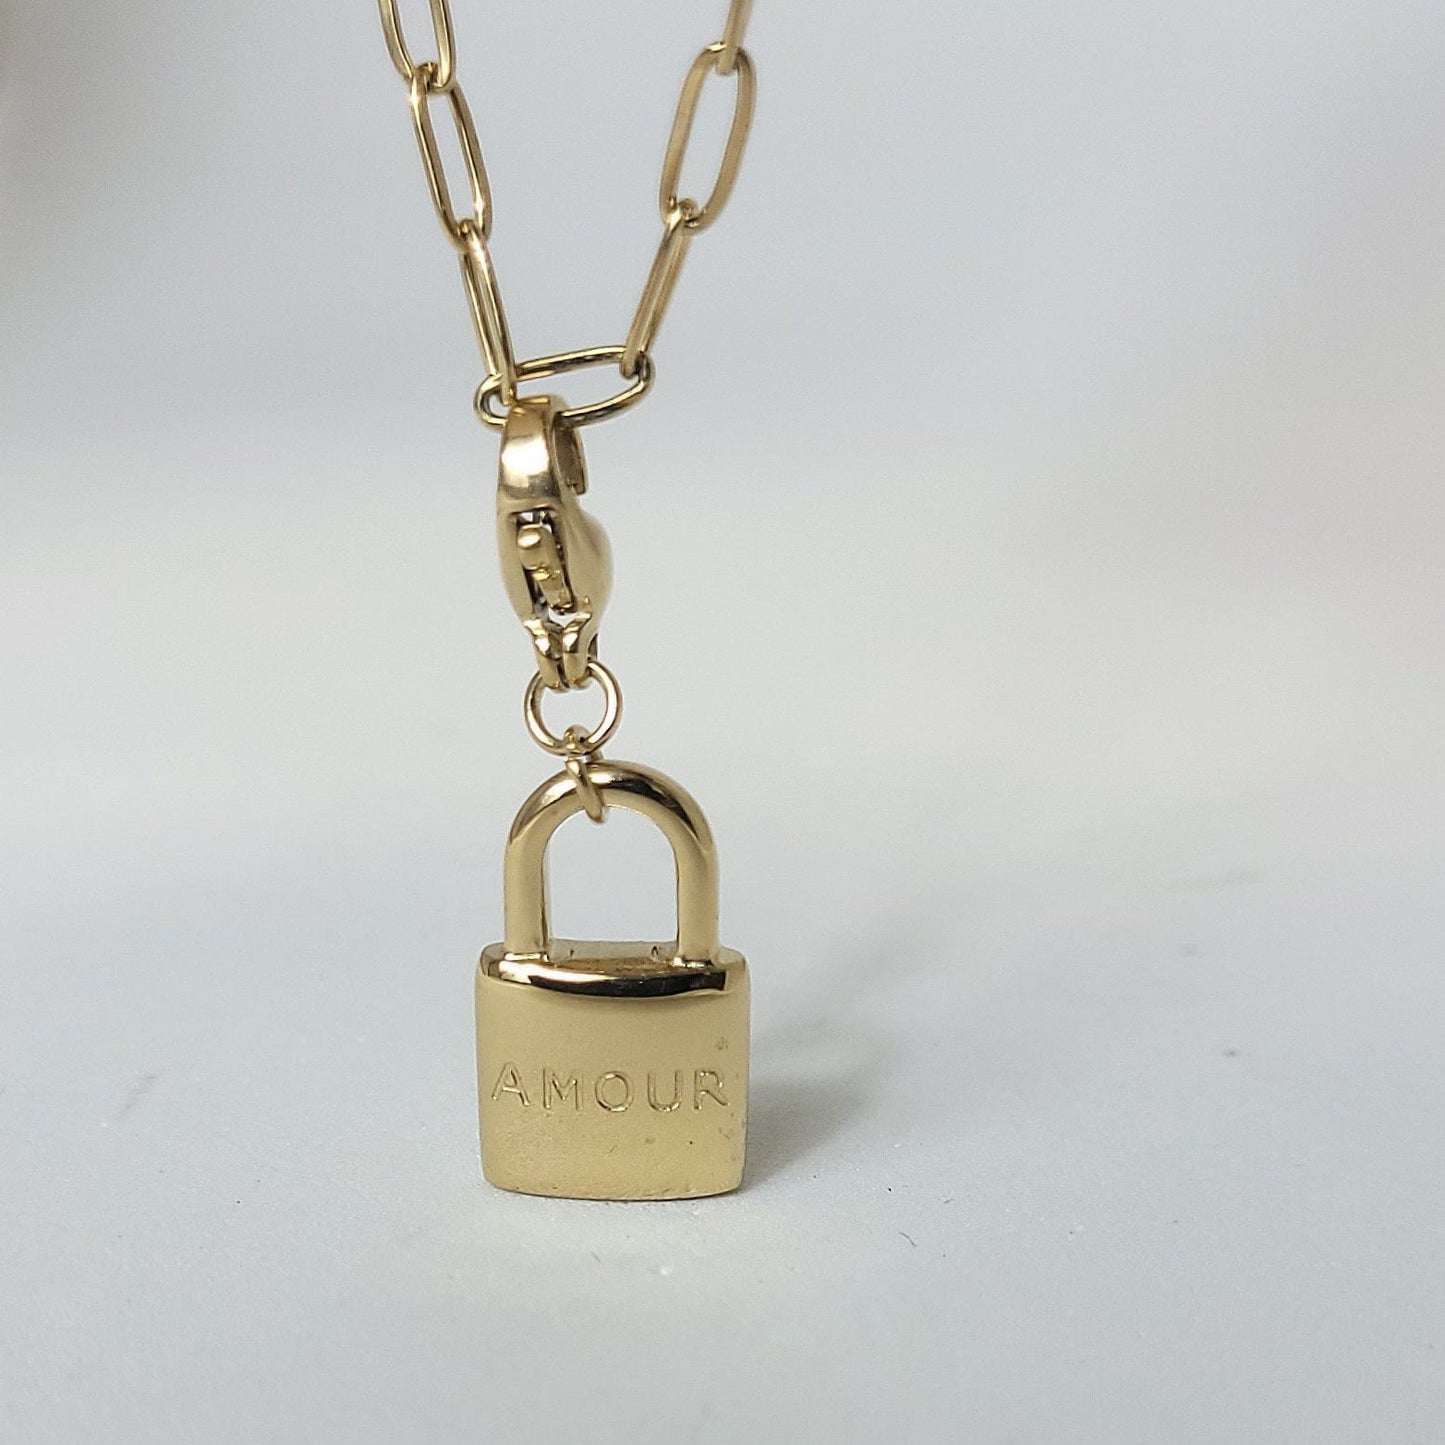 CHARM "AMOUR"